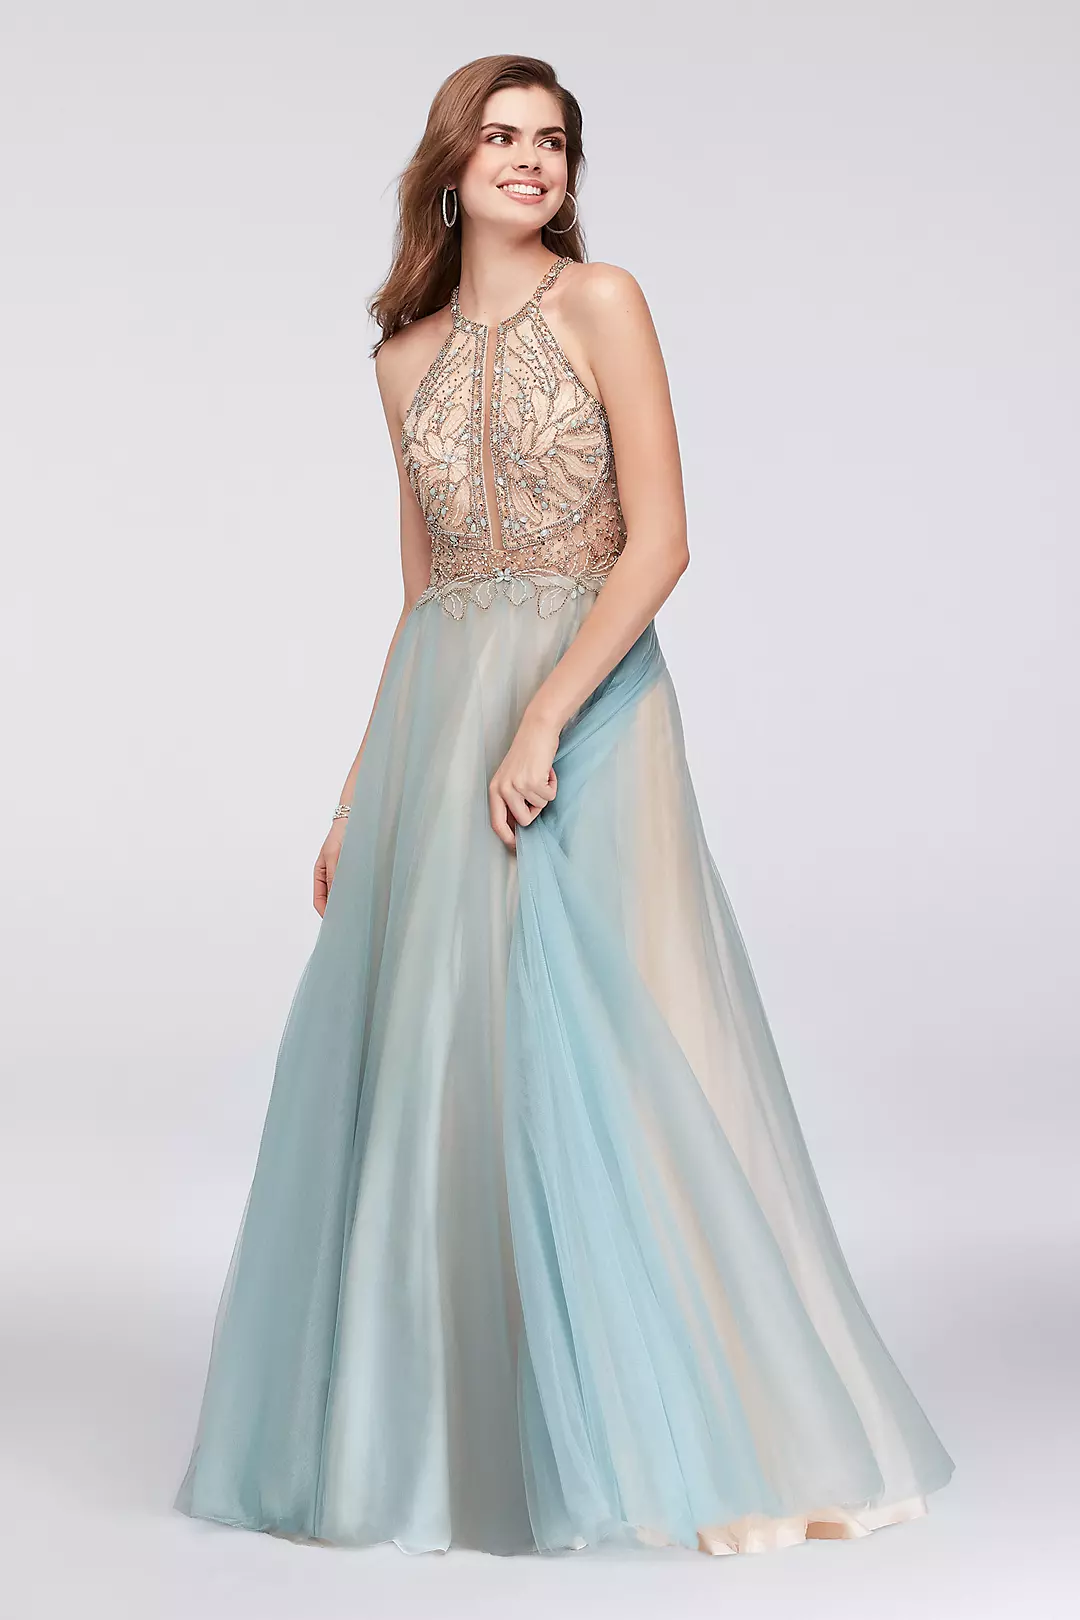 Layered Tulle Ball Gown with Beaded Bodice Image